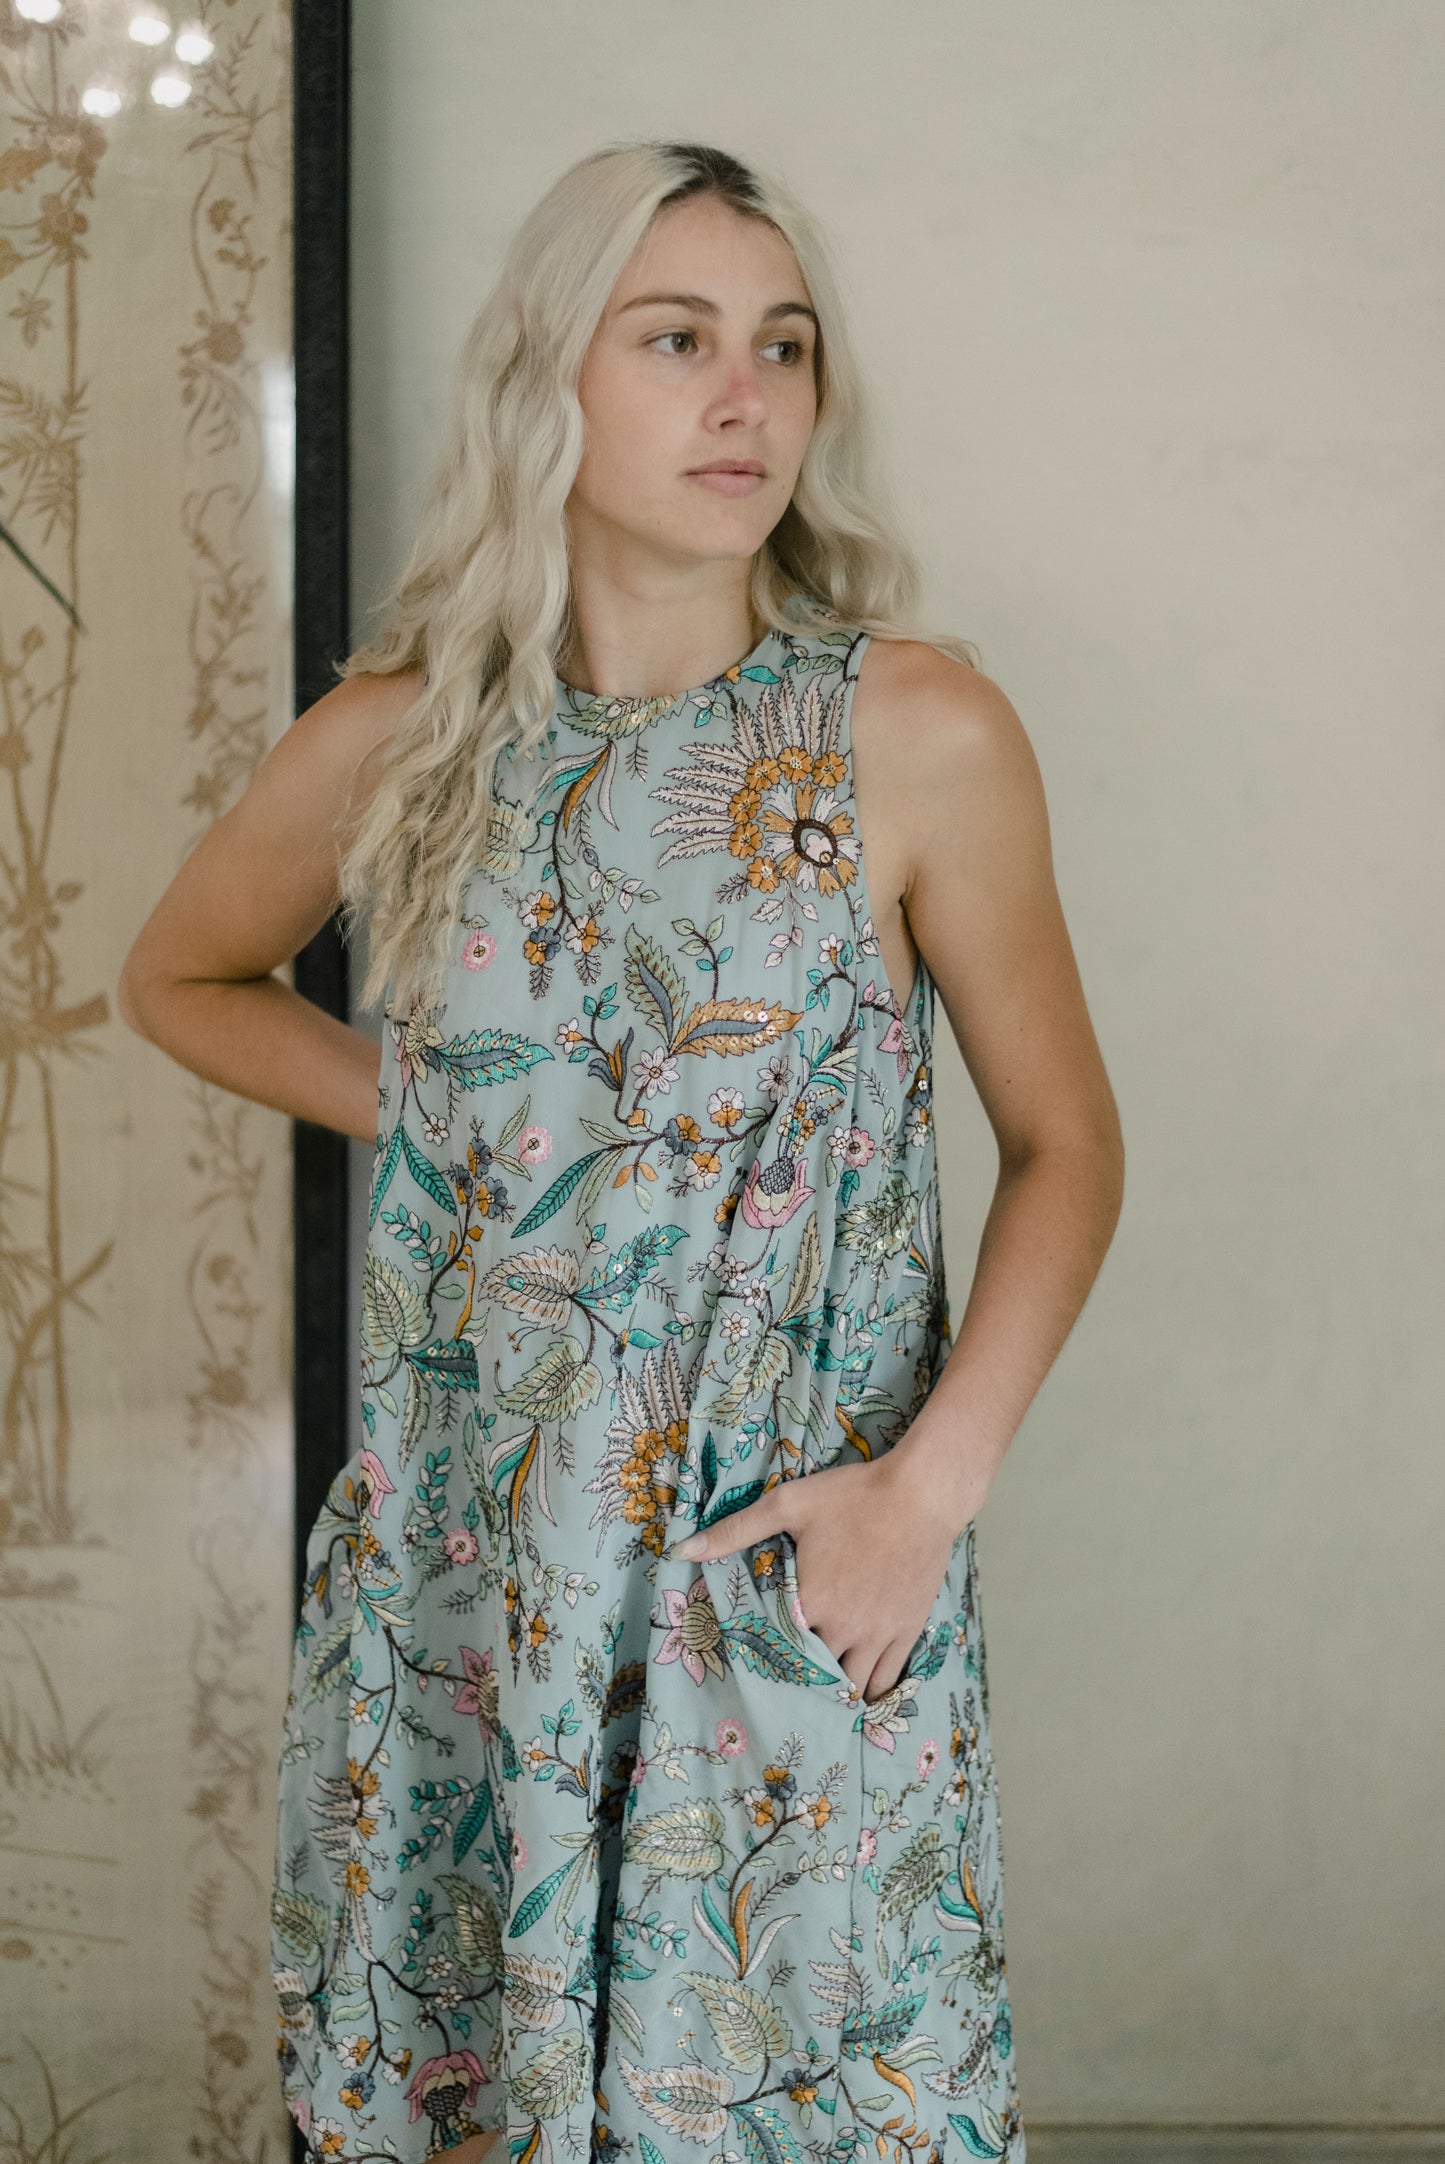 Pale blue embroidered dress